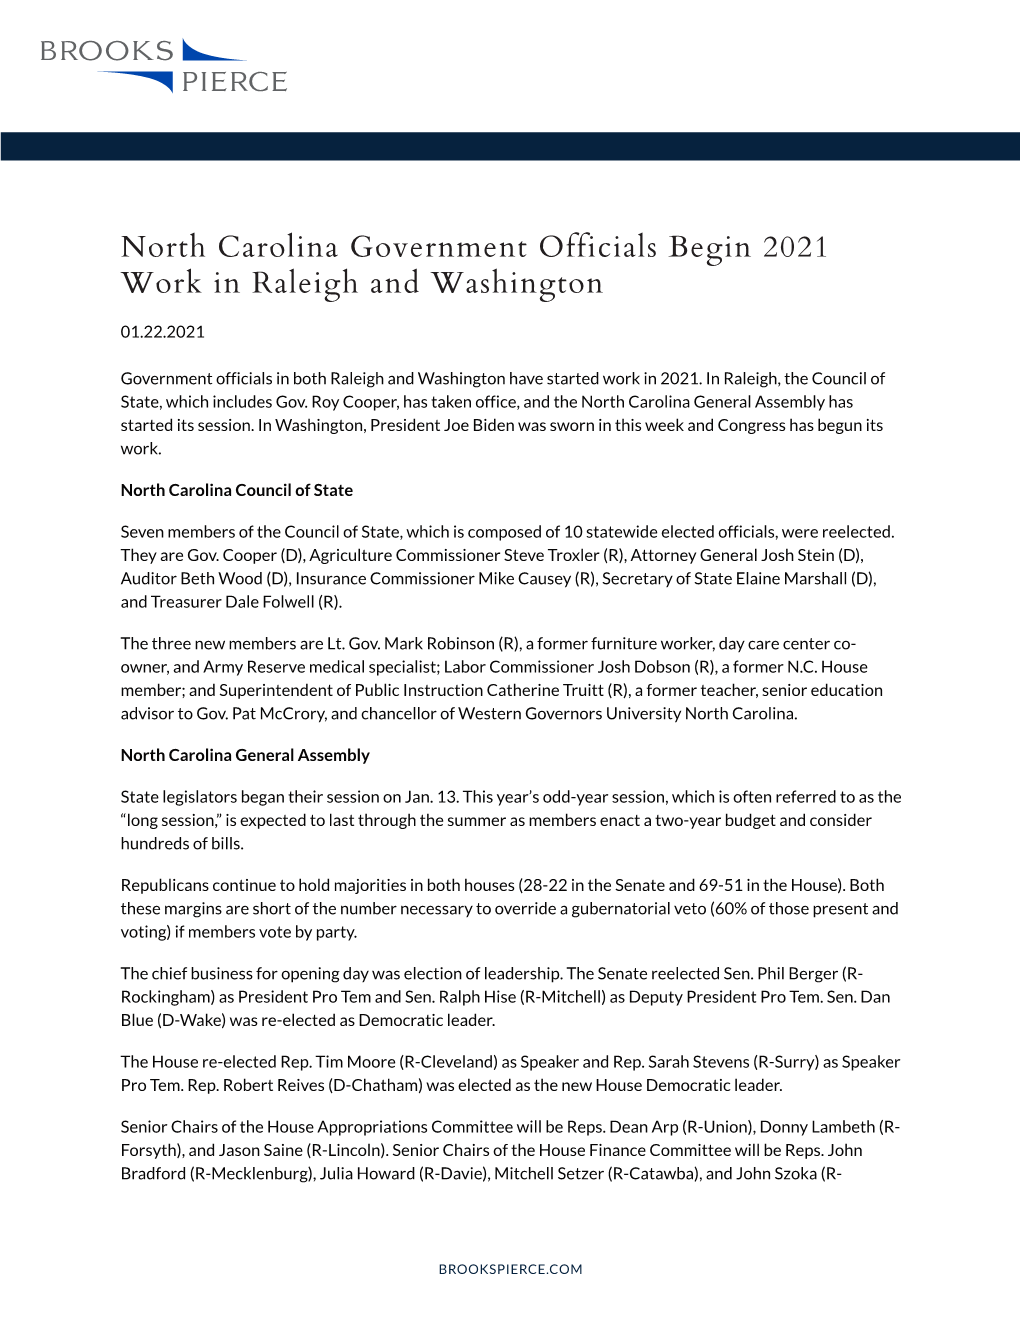 North Carolina Government Officials Begin 2021 Work in Raleigh and Washington